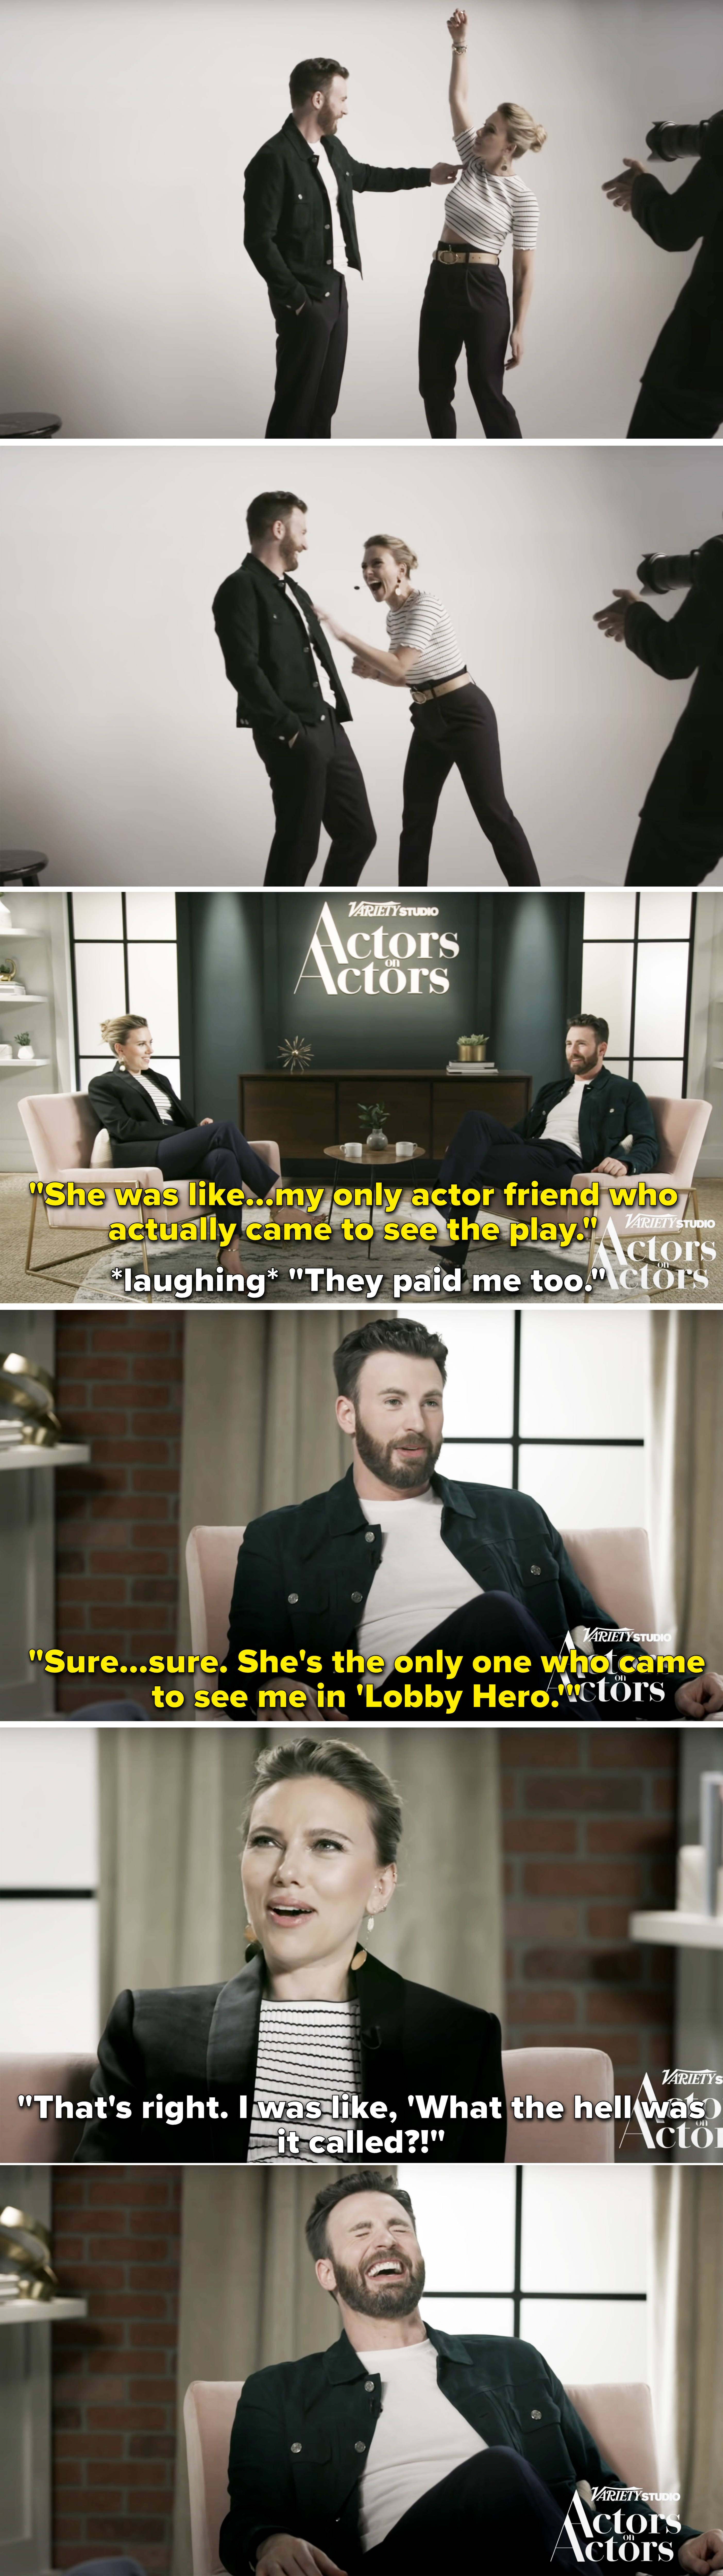 Scarlett Johansson and Chris Evans chatting and laughing on the set of Variety Actors on Actors